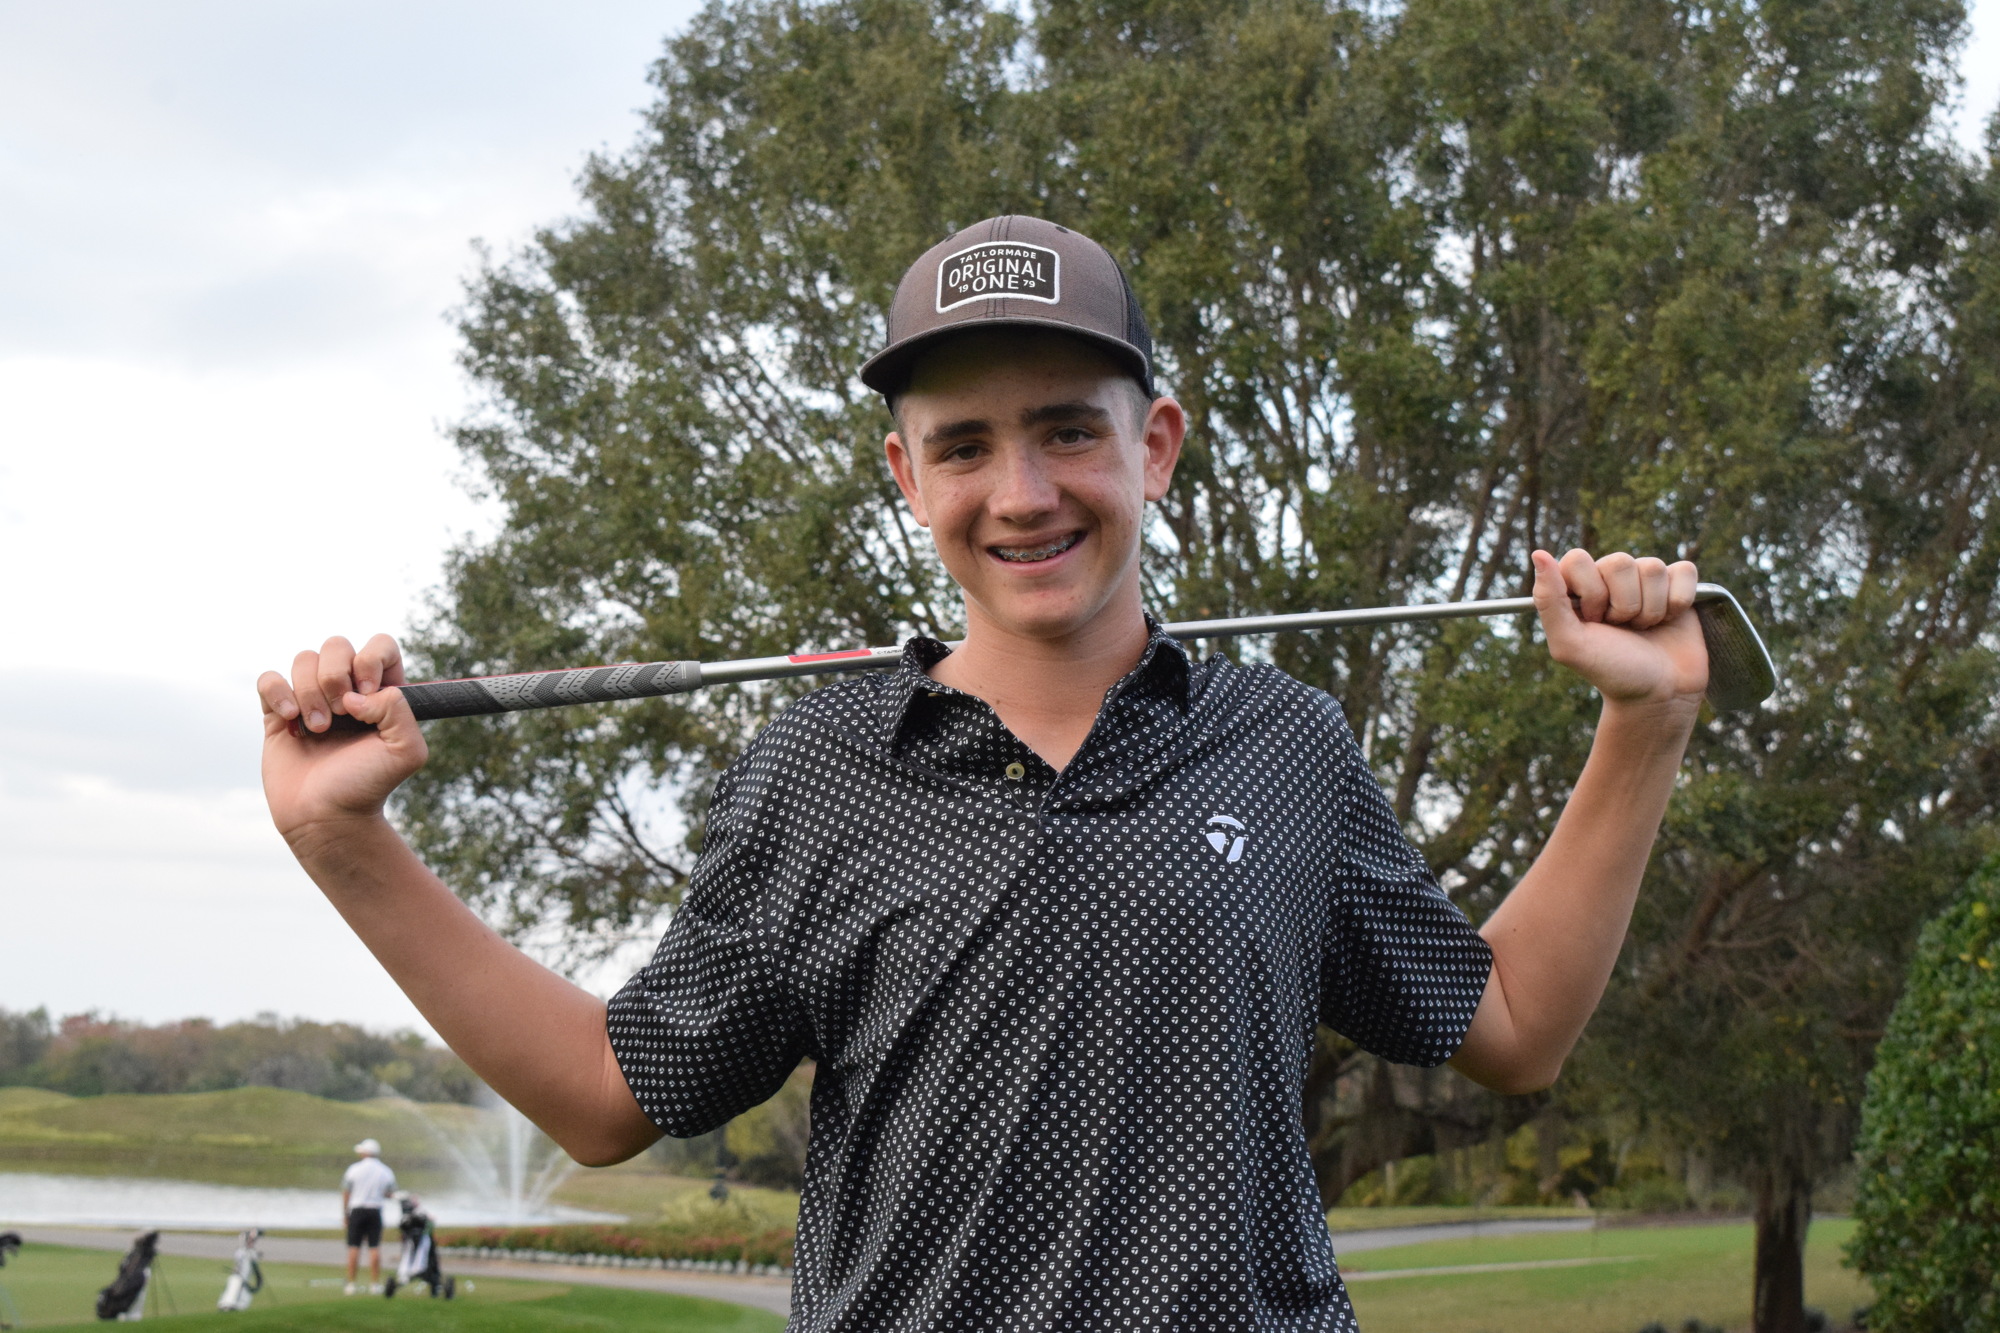 Country Club's Lukas Wahlstrom looks forward to seeing players like Dustin Johnson play at the World Golf Championships. He says he's going to take what he learns while volunteering and apply it to his game.